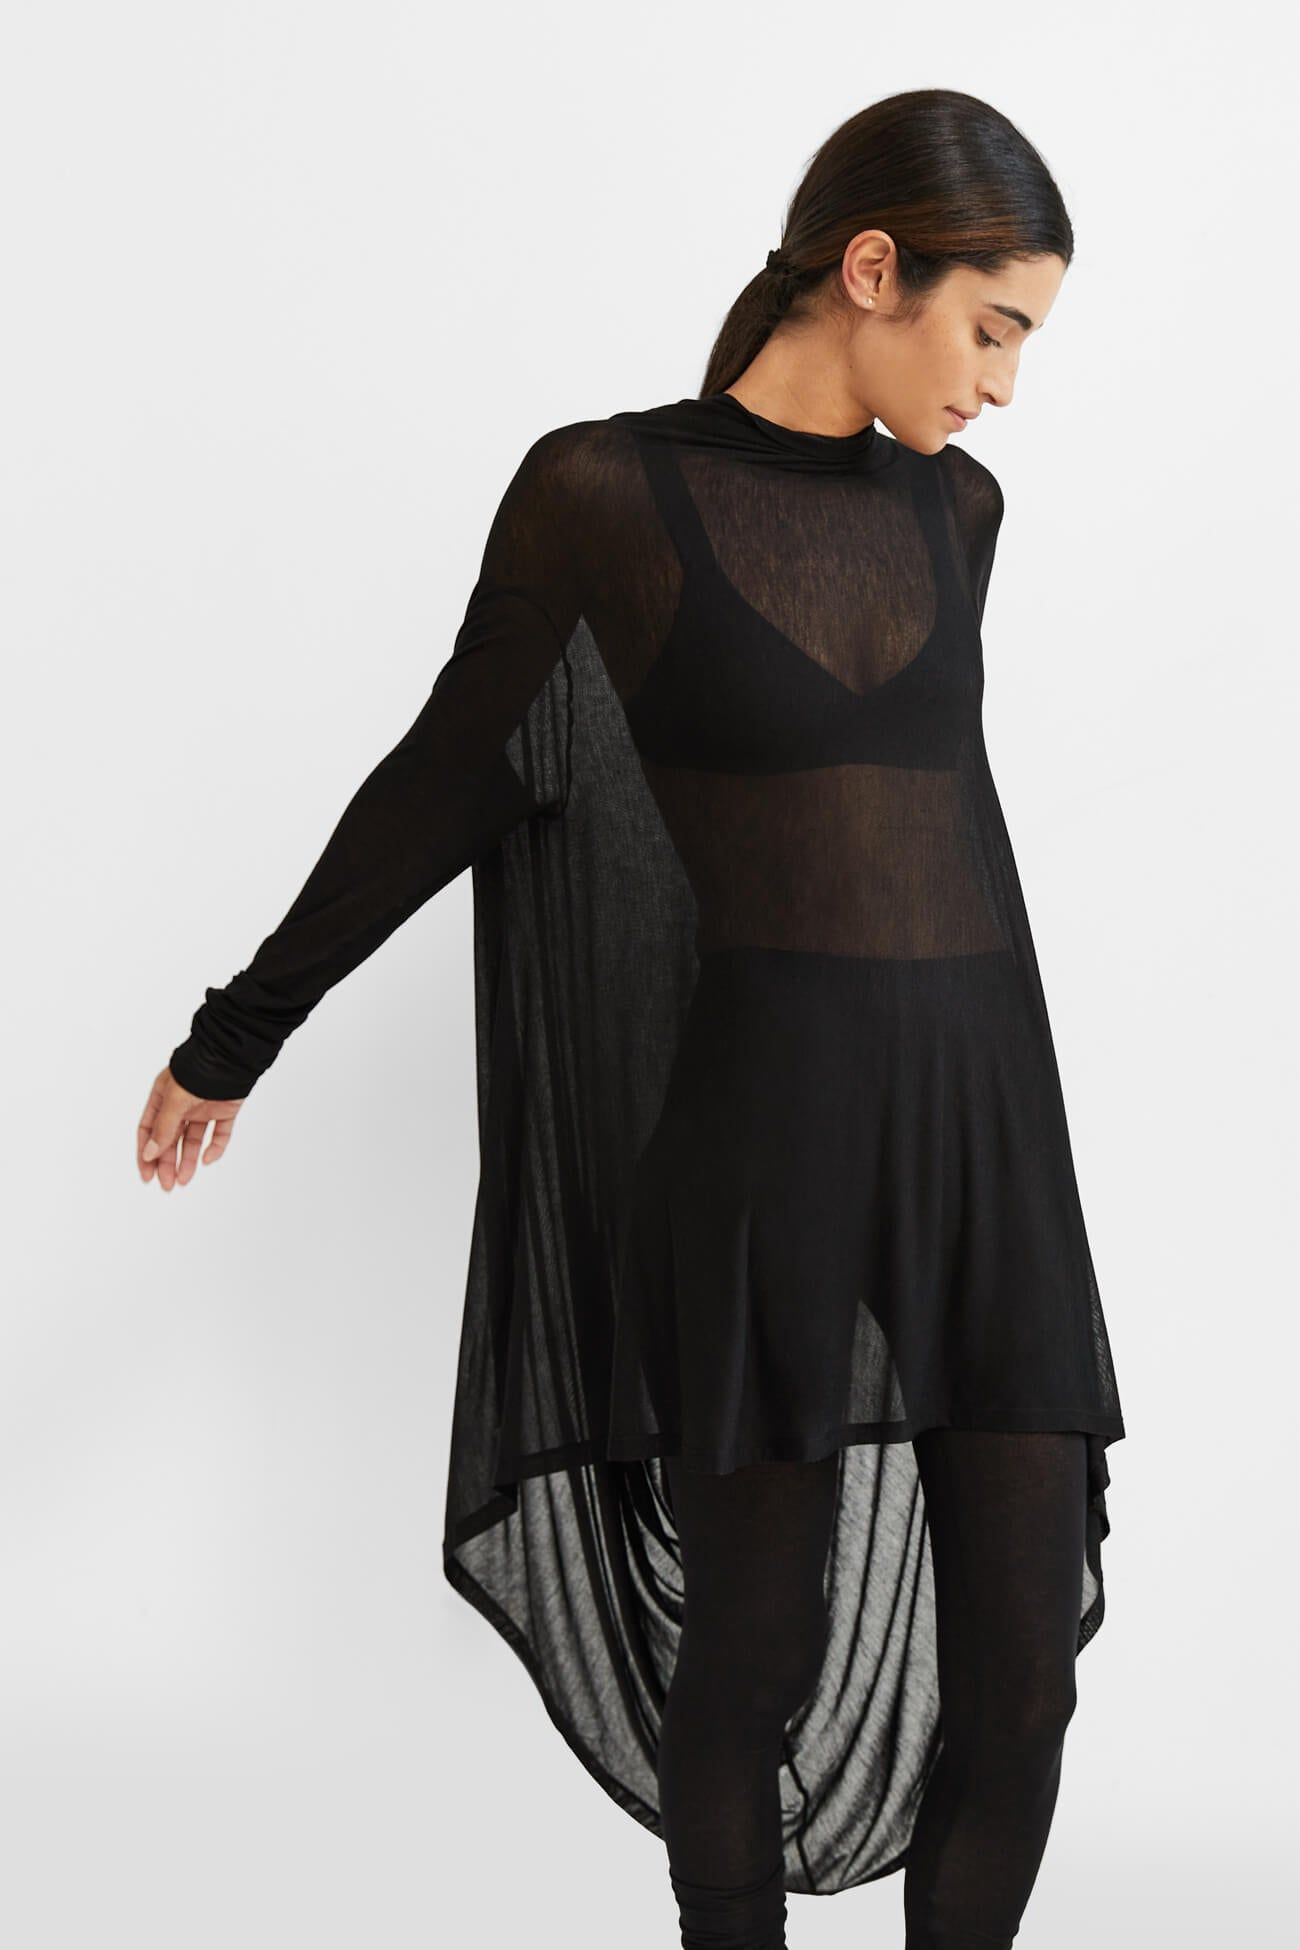 Effortless Style: Stay Chic in Black Tunic Tops